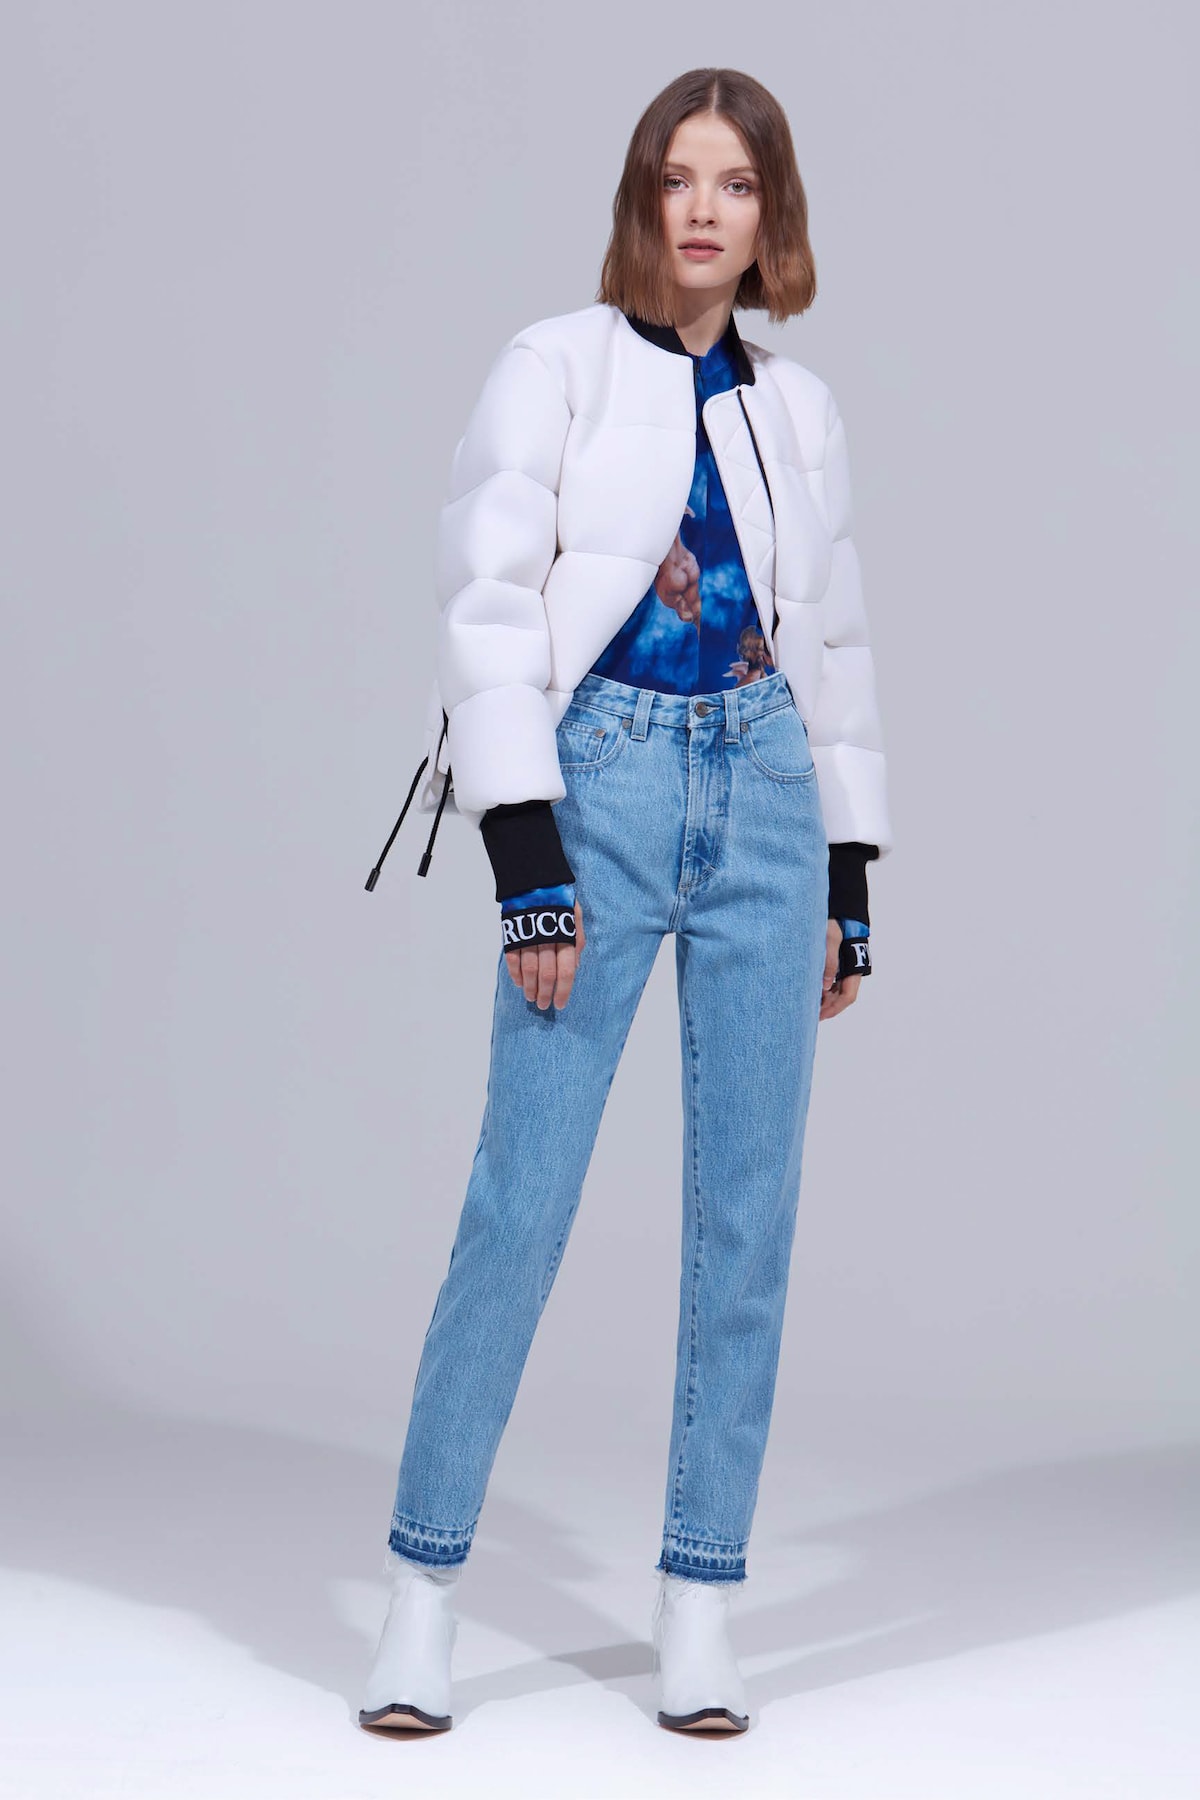 Fiorucci Pre-Spring 2019 Lookbook Collection Materials Texture Transparent Shimmer